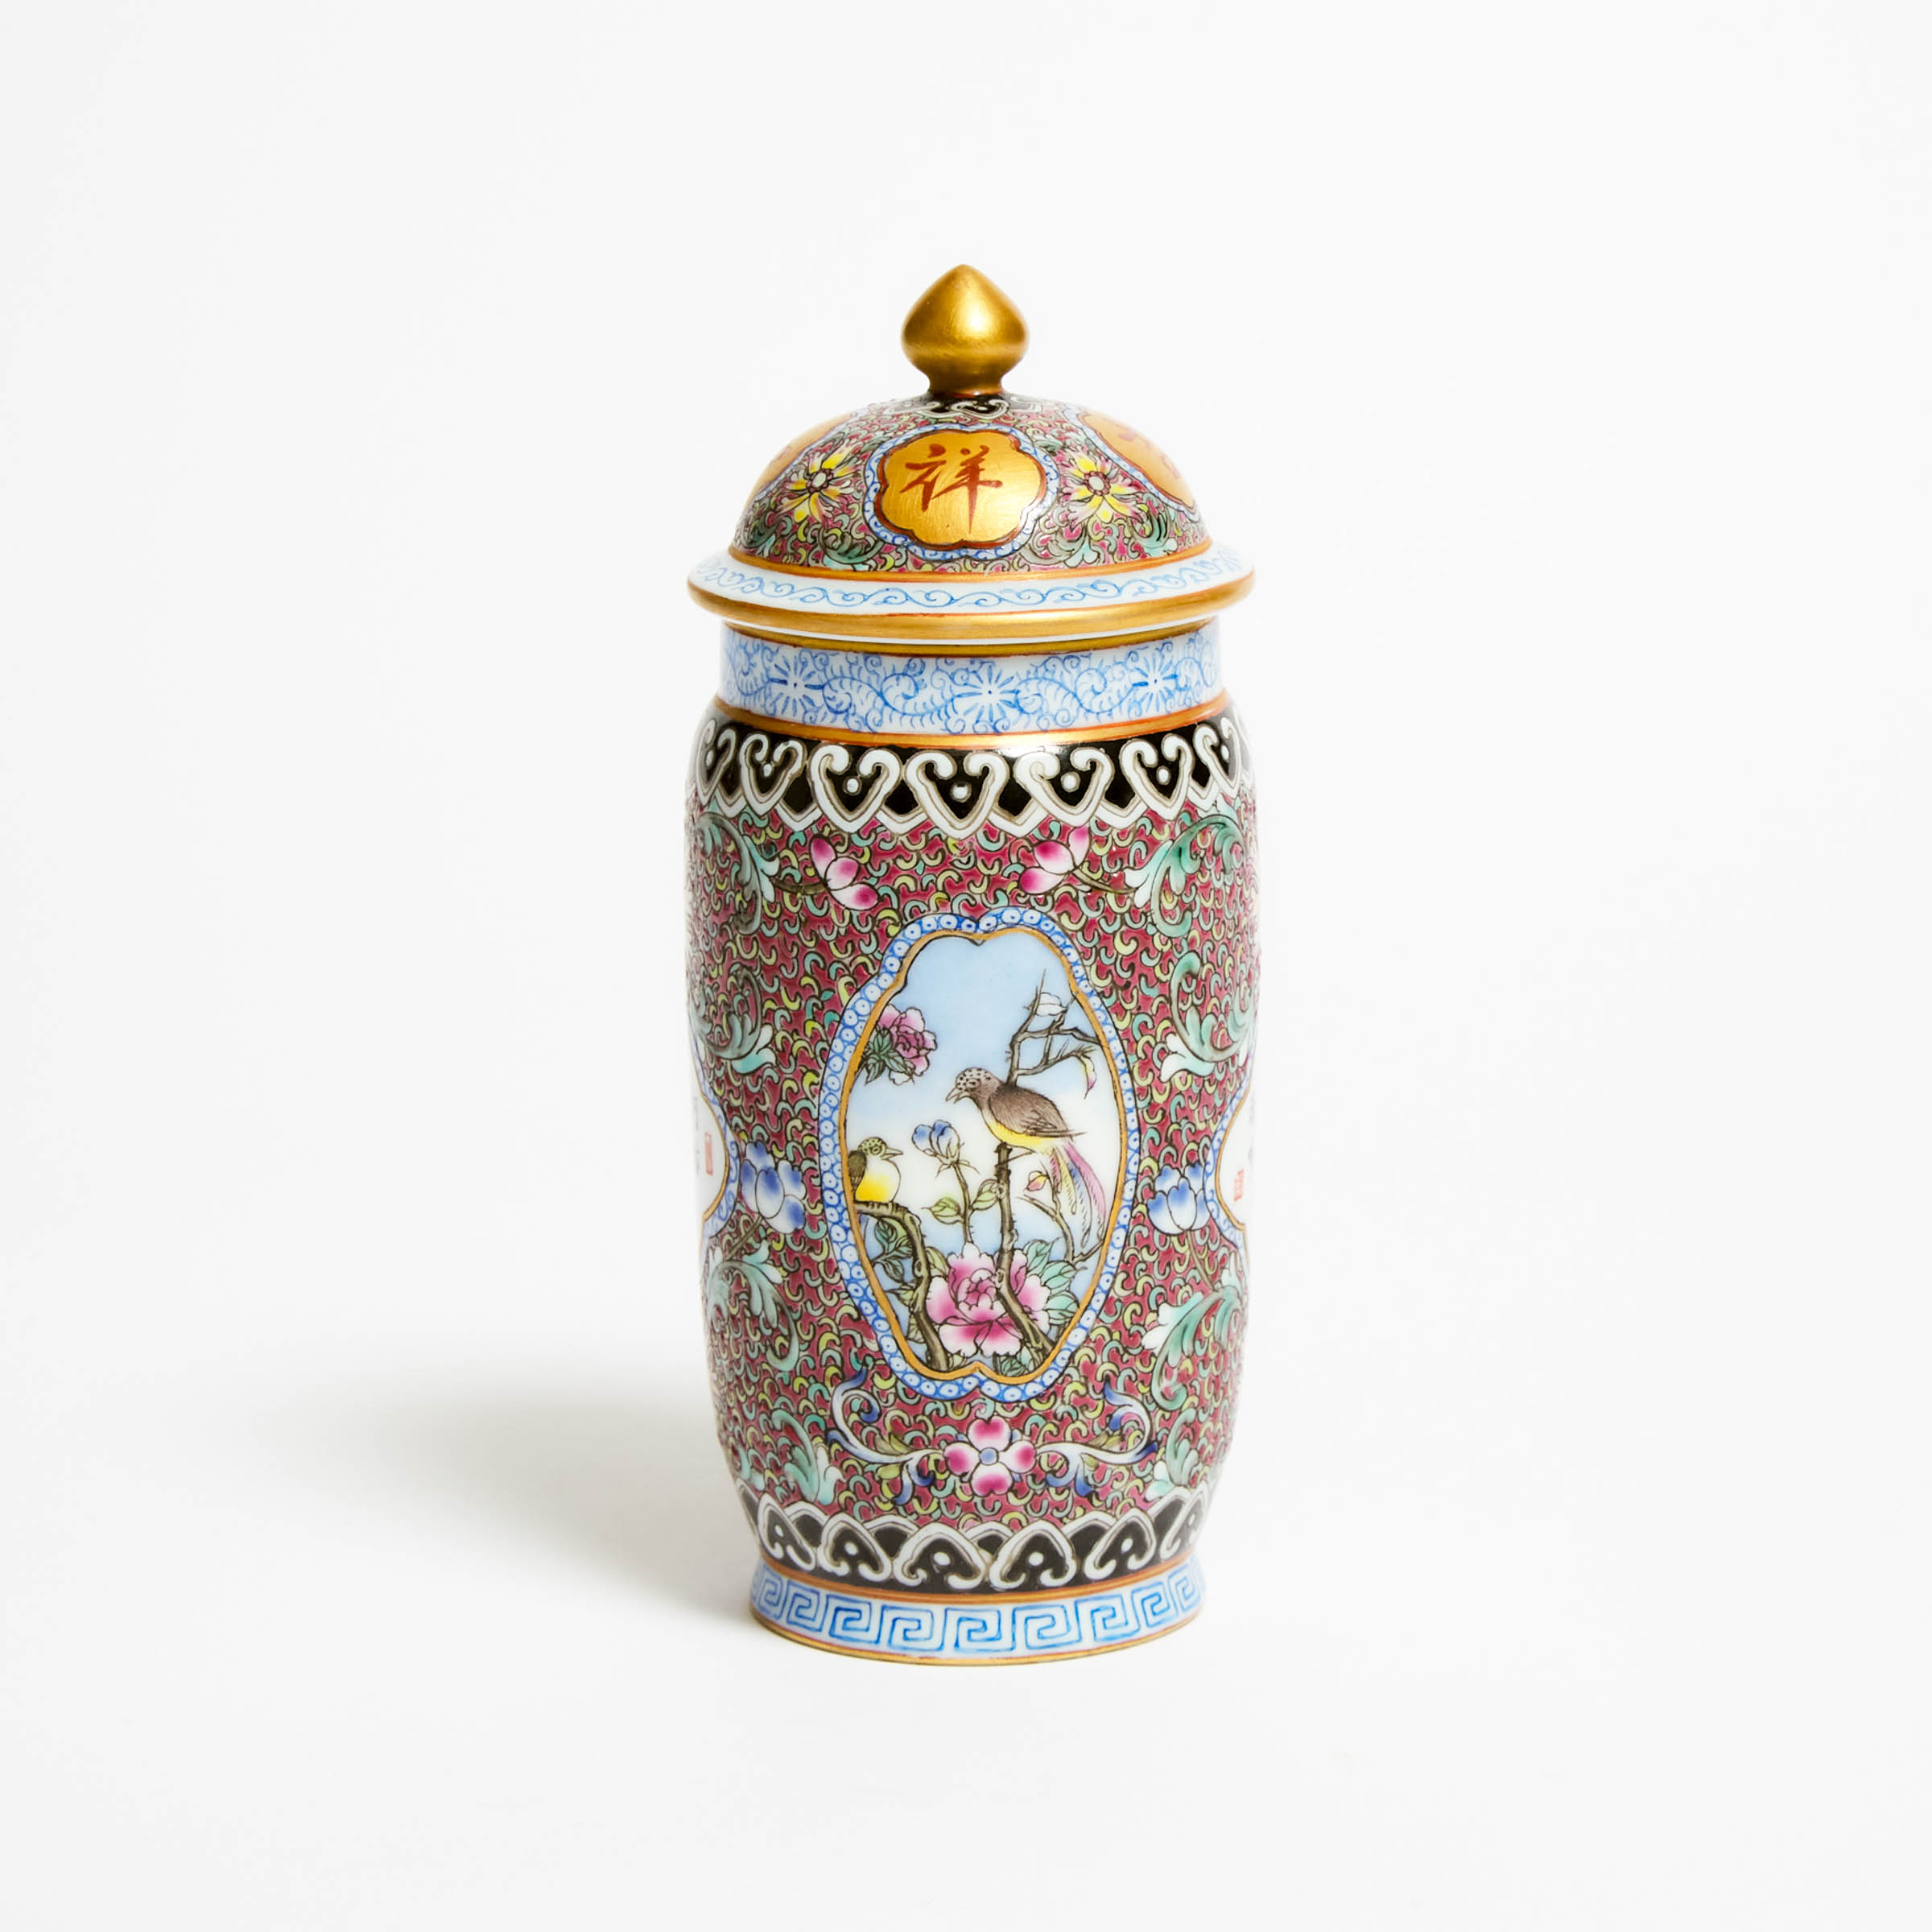 A Gilt-Decorated Famille Rose Lantern Vase and Cover, Yongzheng Mark, Republican Period (1912-1949)